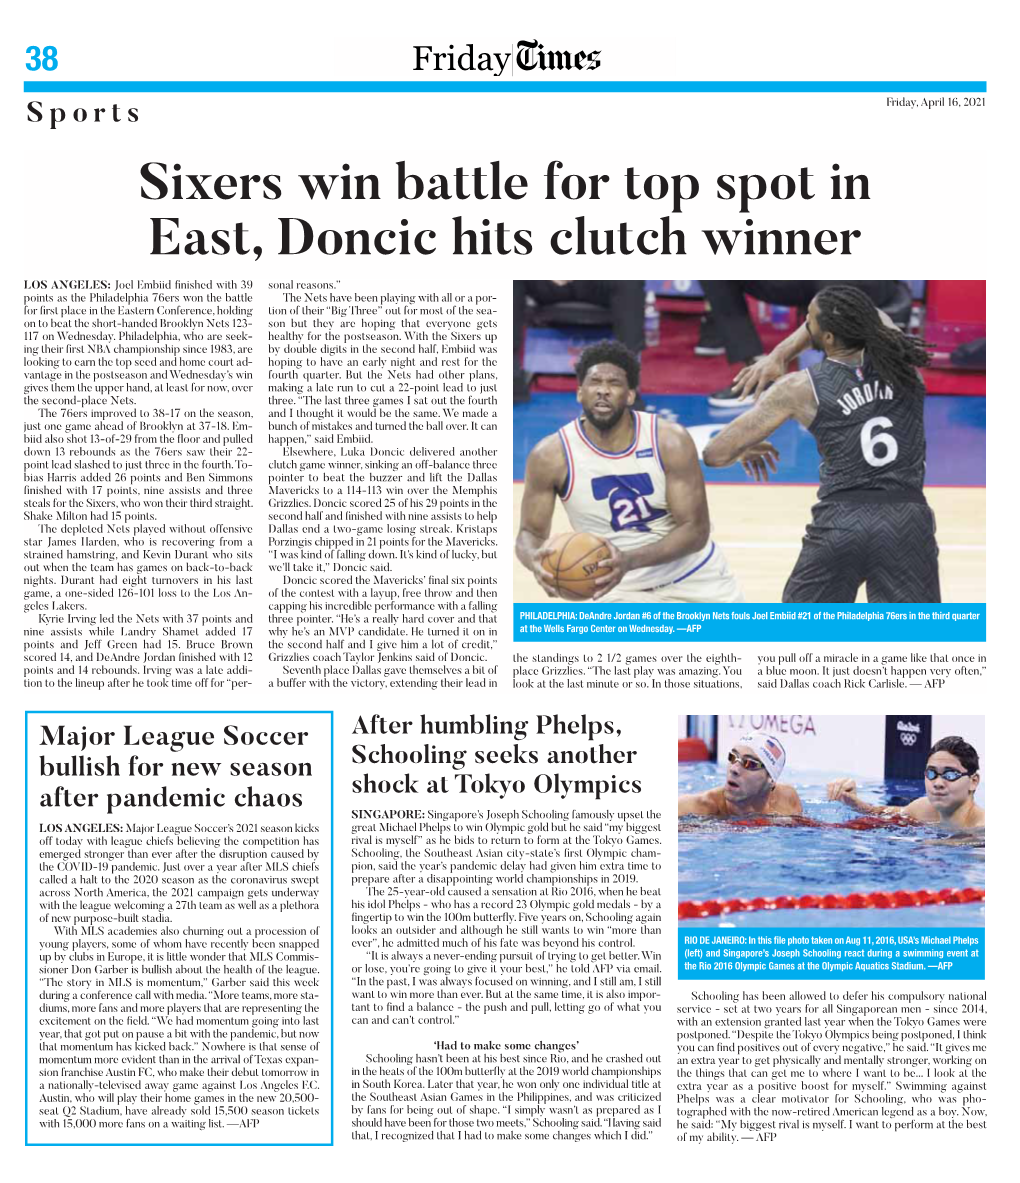 Sixers Win Battle for Top Spot in East, Doncic Hits Clutch Winner